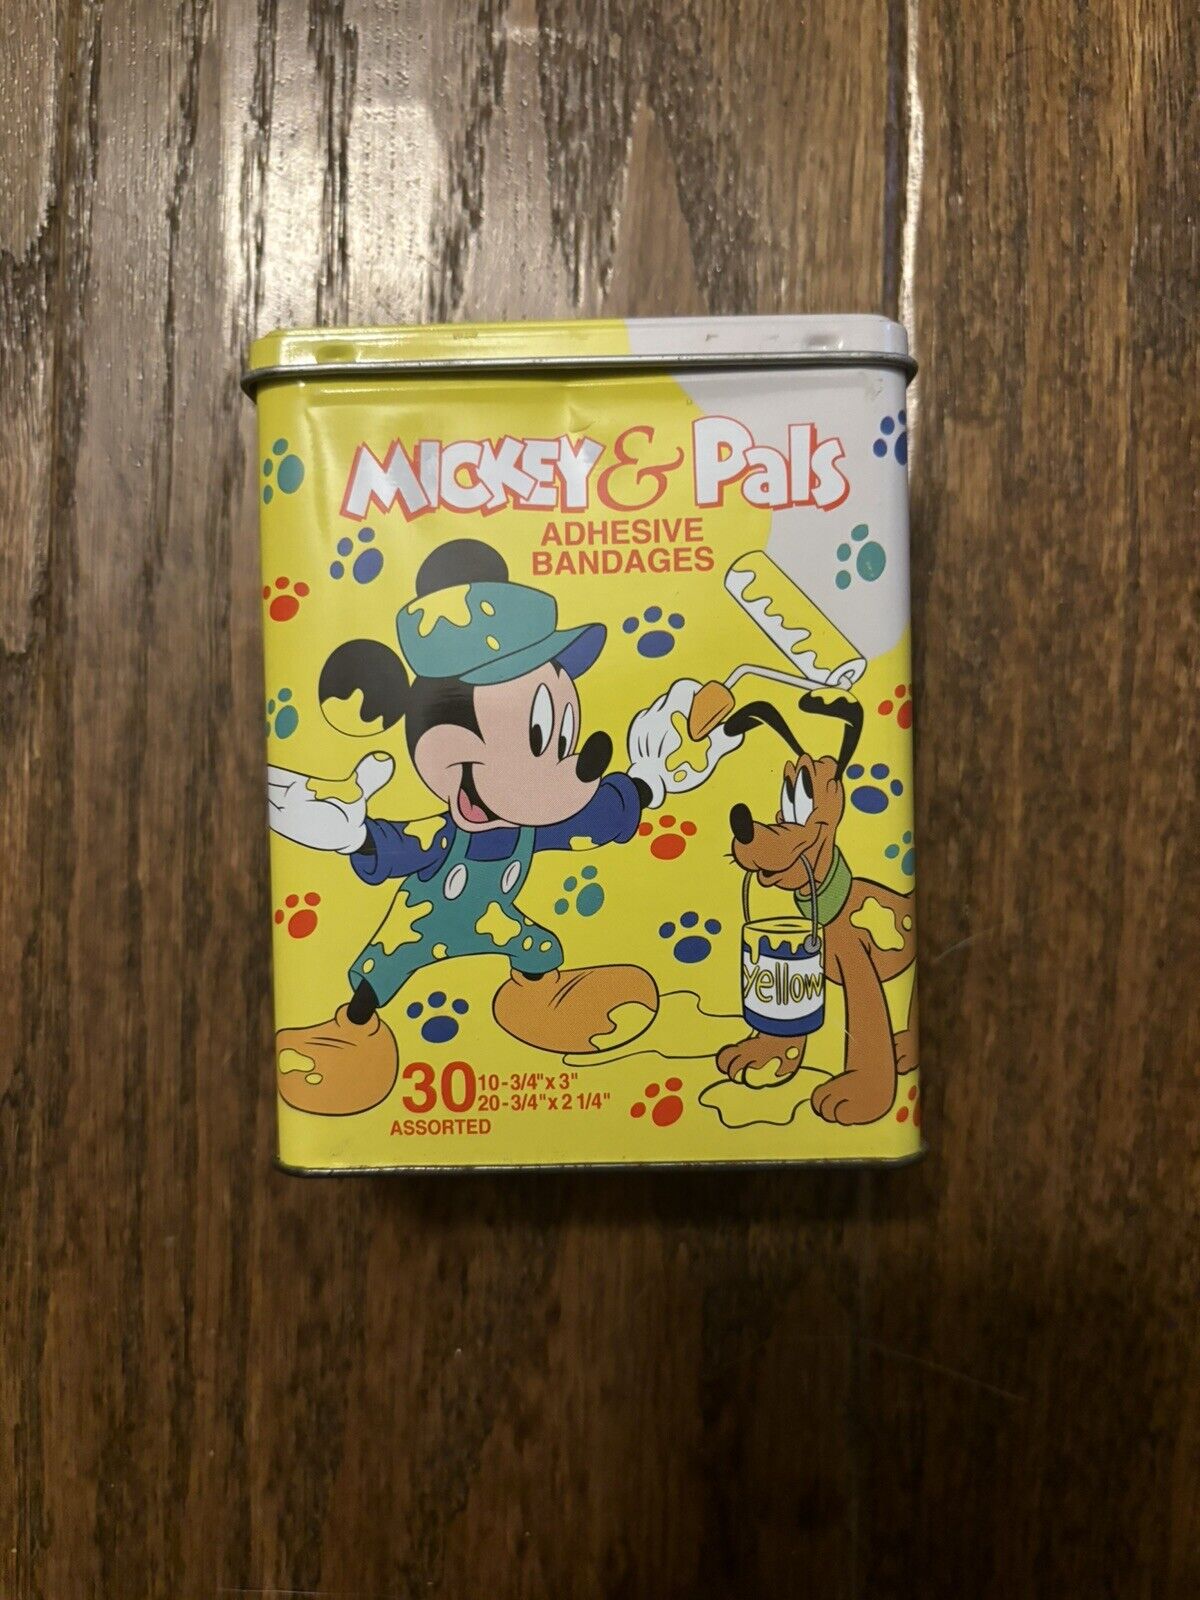 Vintage Mickey and Pals Bandages Metal Box Collectible Disney (Bandages Inside)